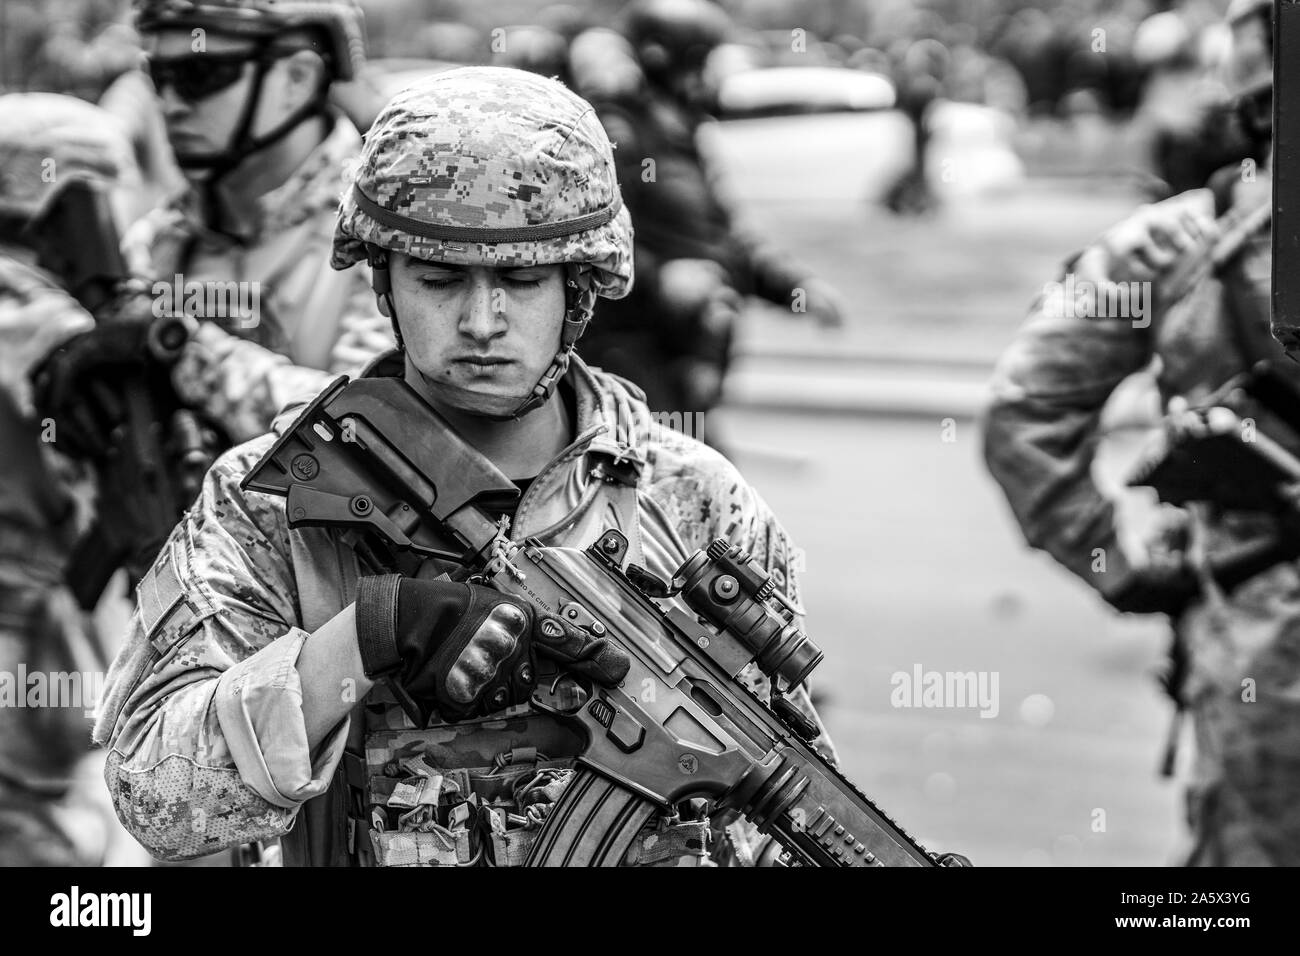 Soldiers in the streets of Santiago during the latest October 2019 riots in the Chilean country. Like a war combat zone the army move across the city Stock Photo